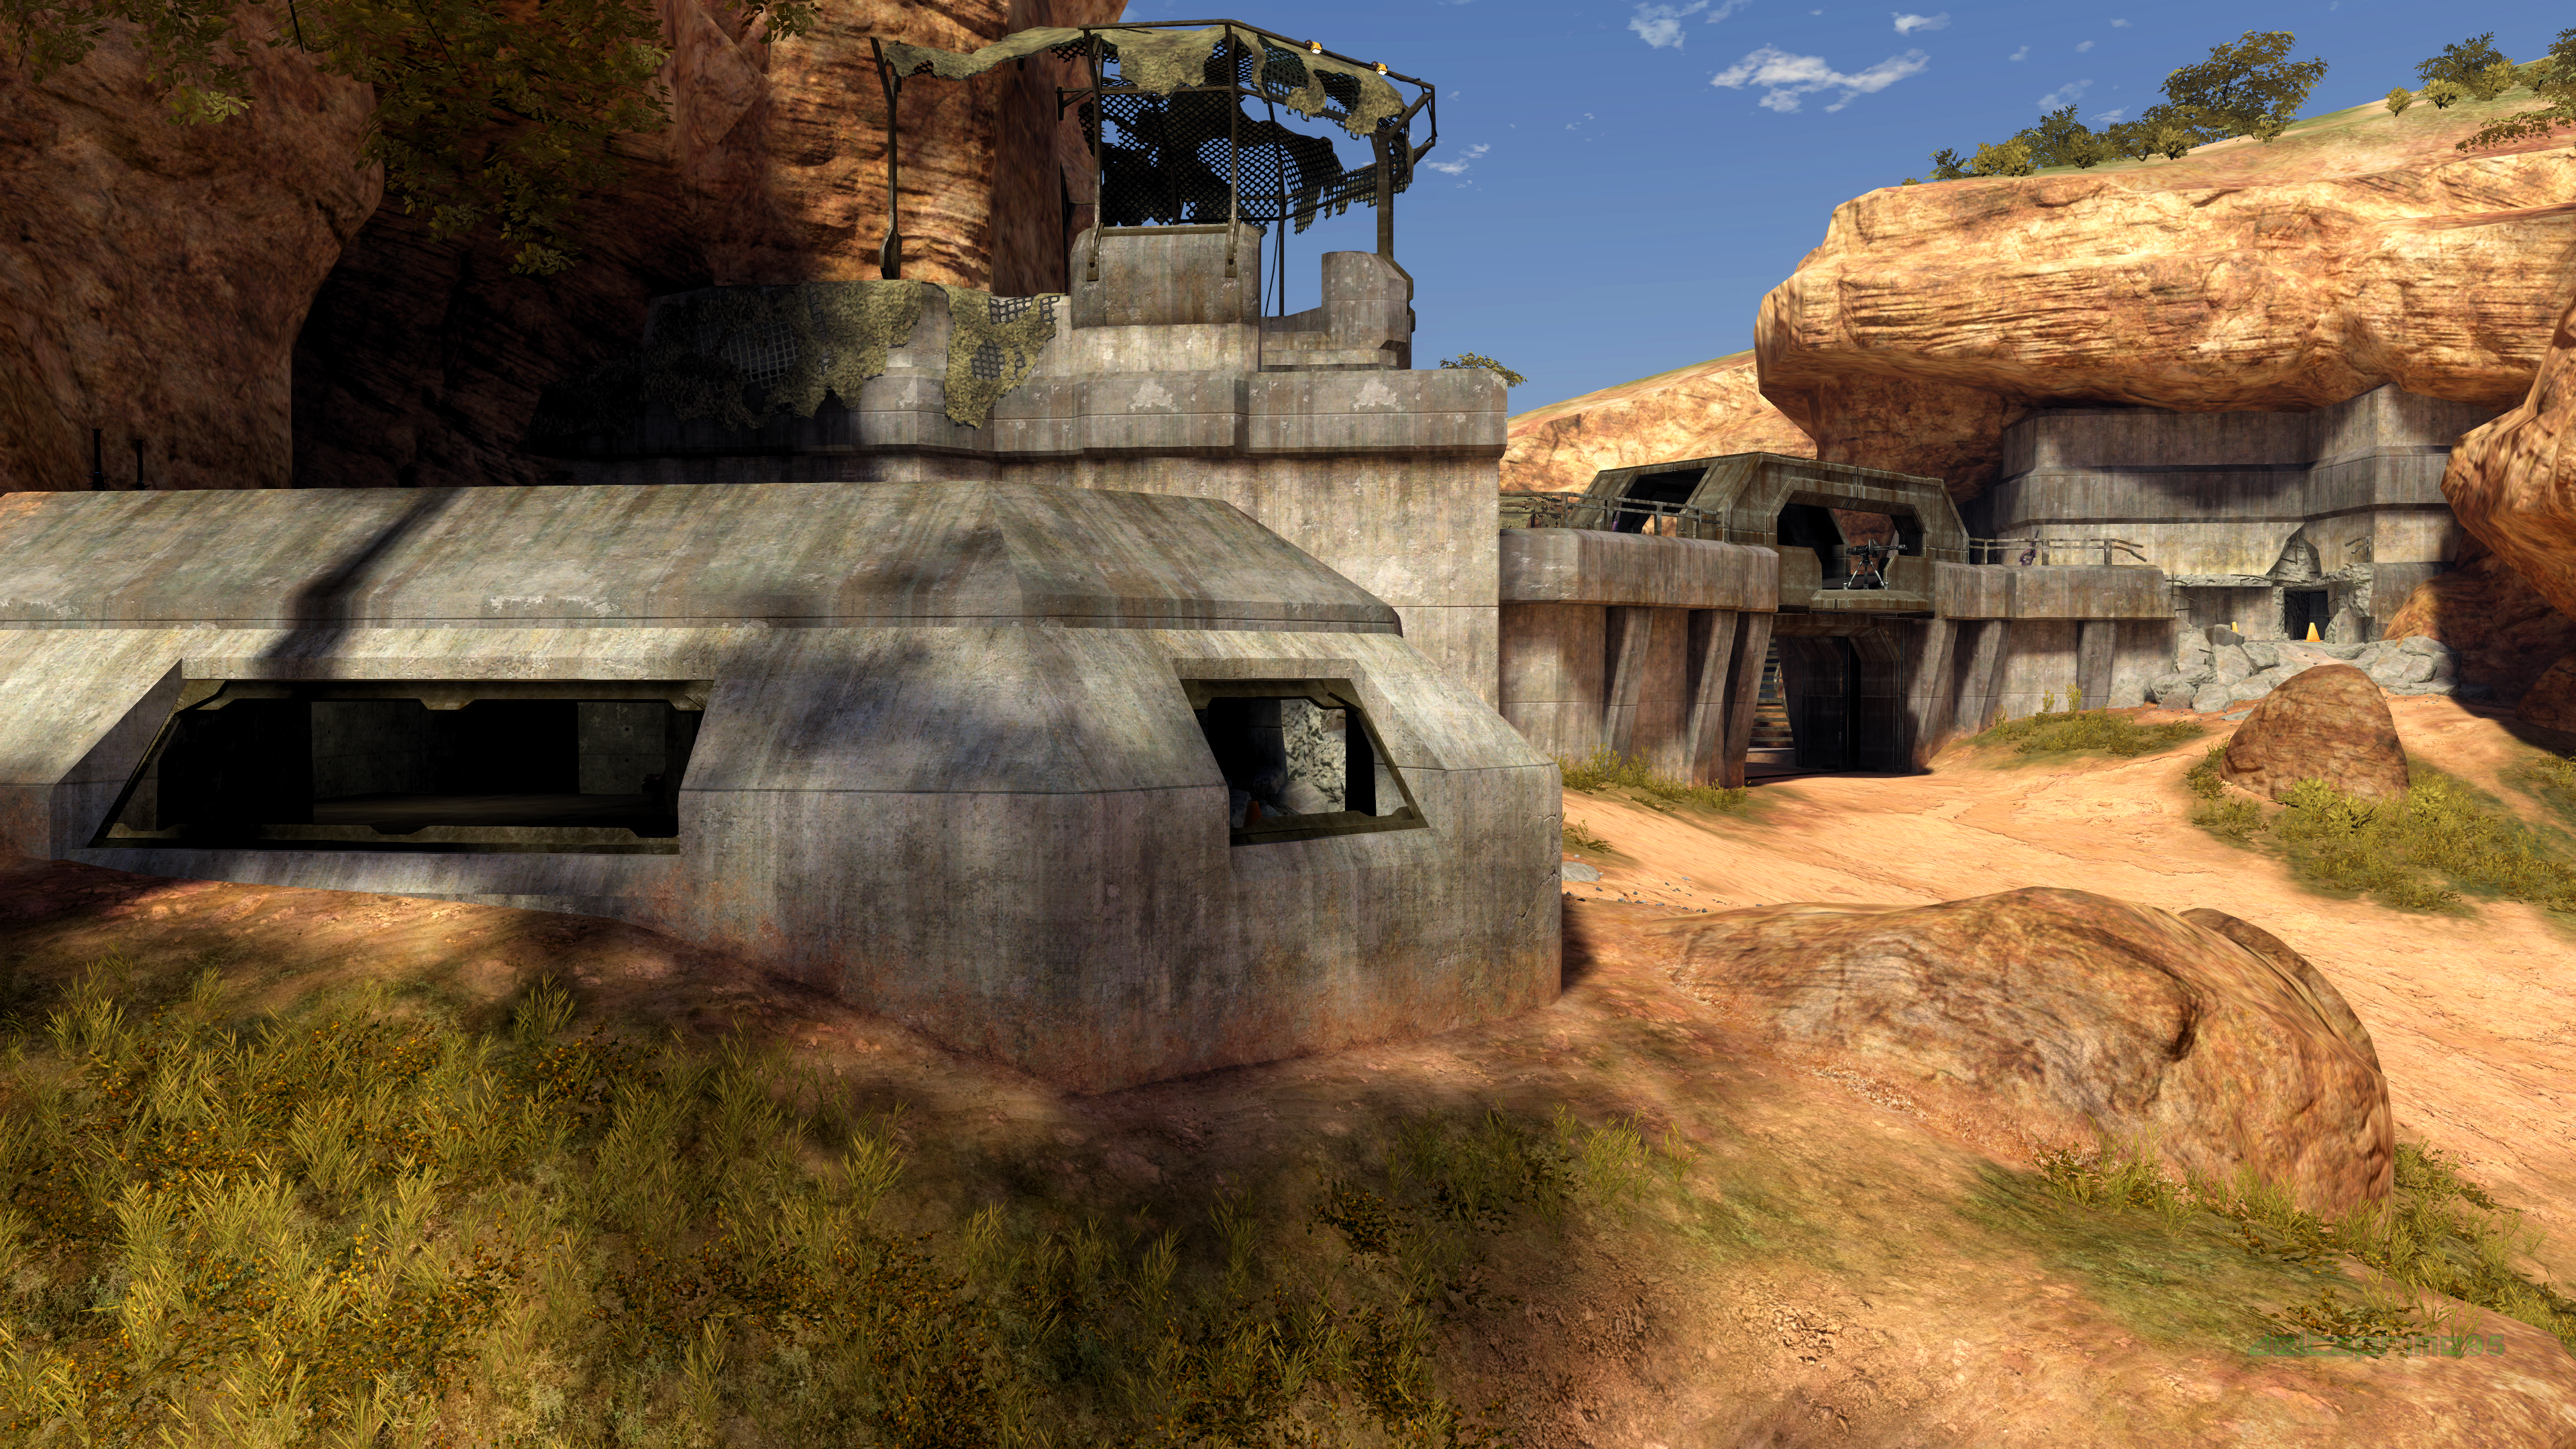 In Game PC Gaming Screen Shot Halo 3 High Ground Multiplayer Map Africa Science Fiction Bunker Fortr 3840x2160